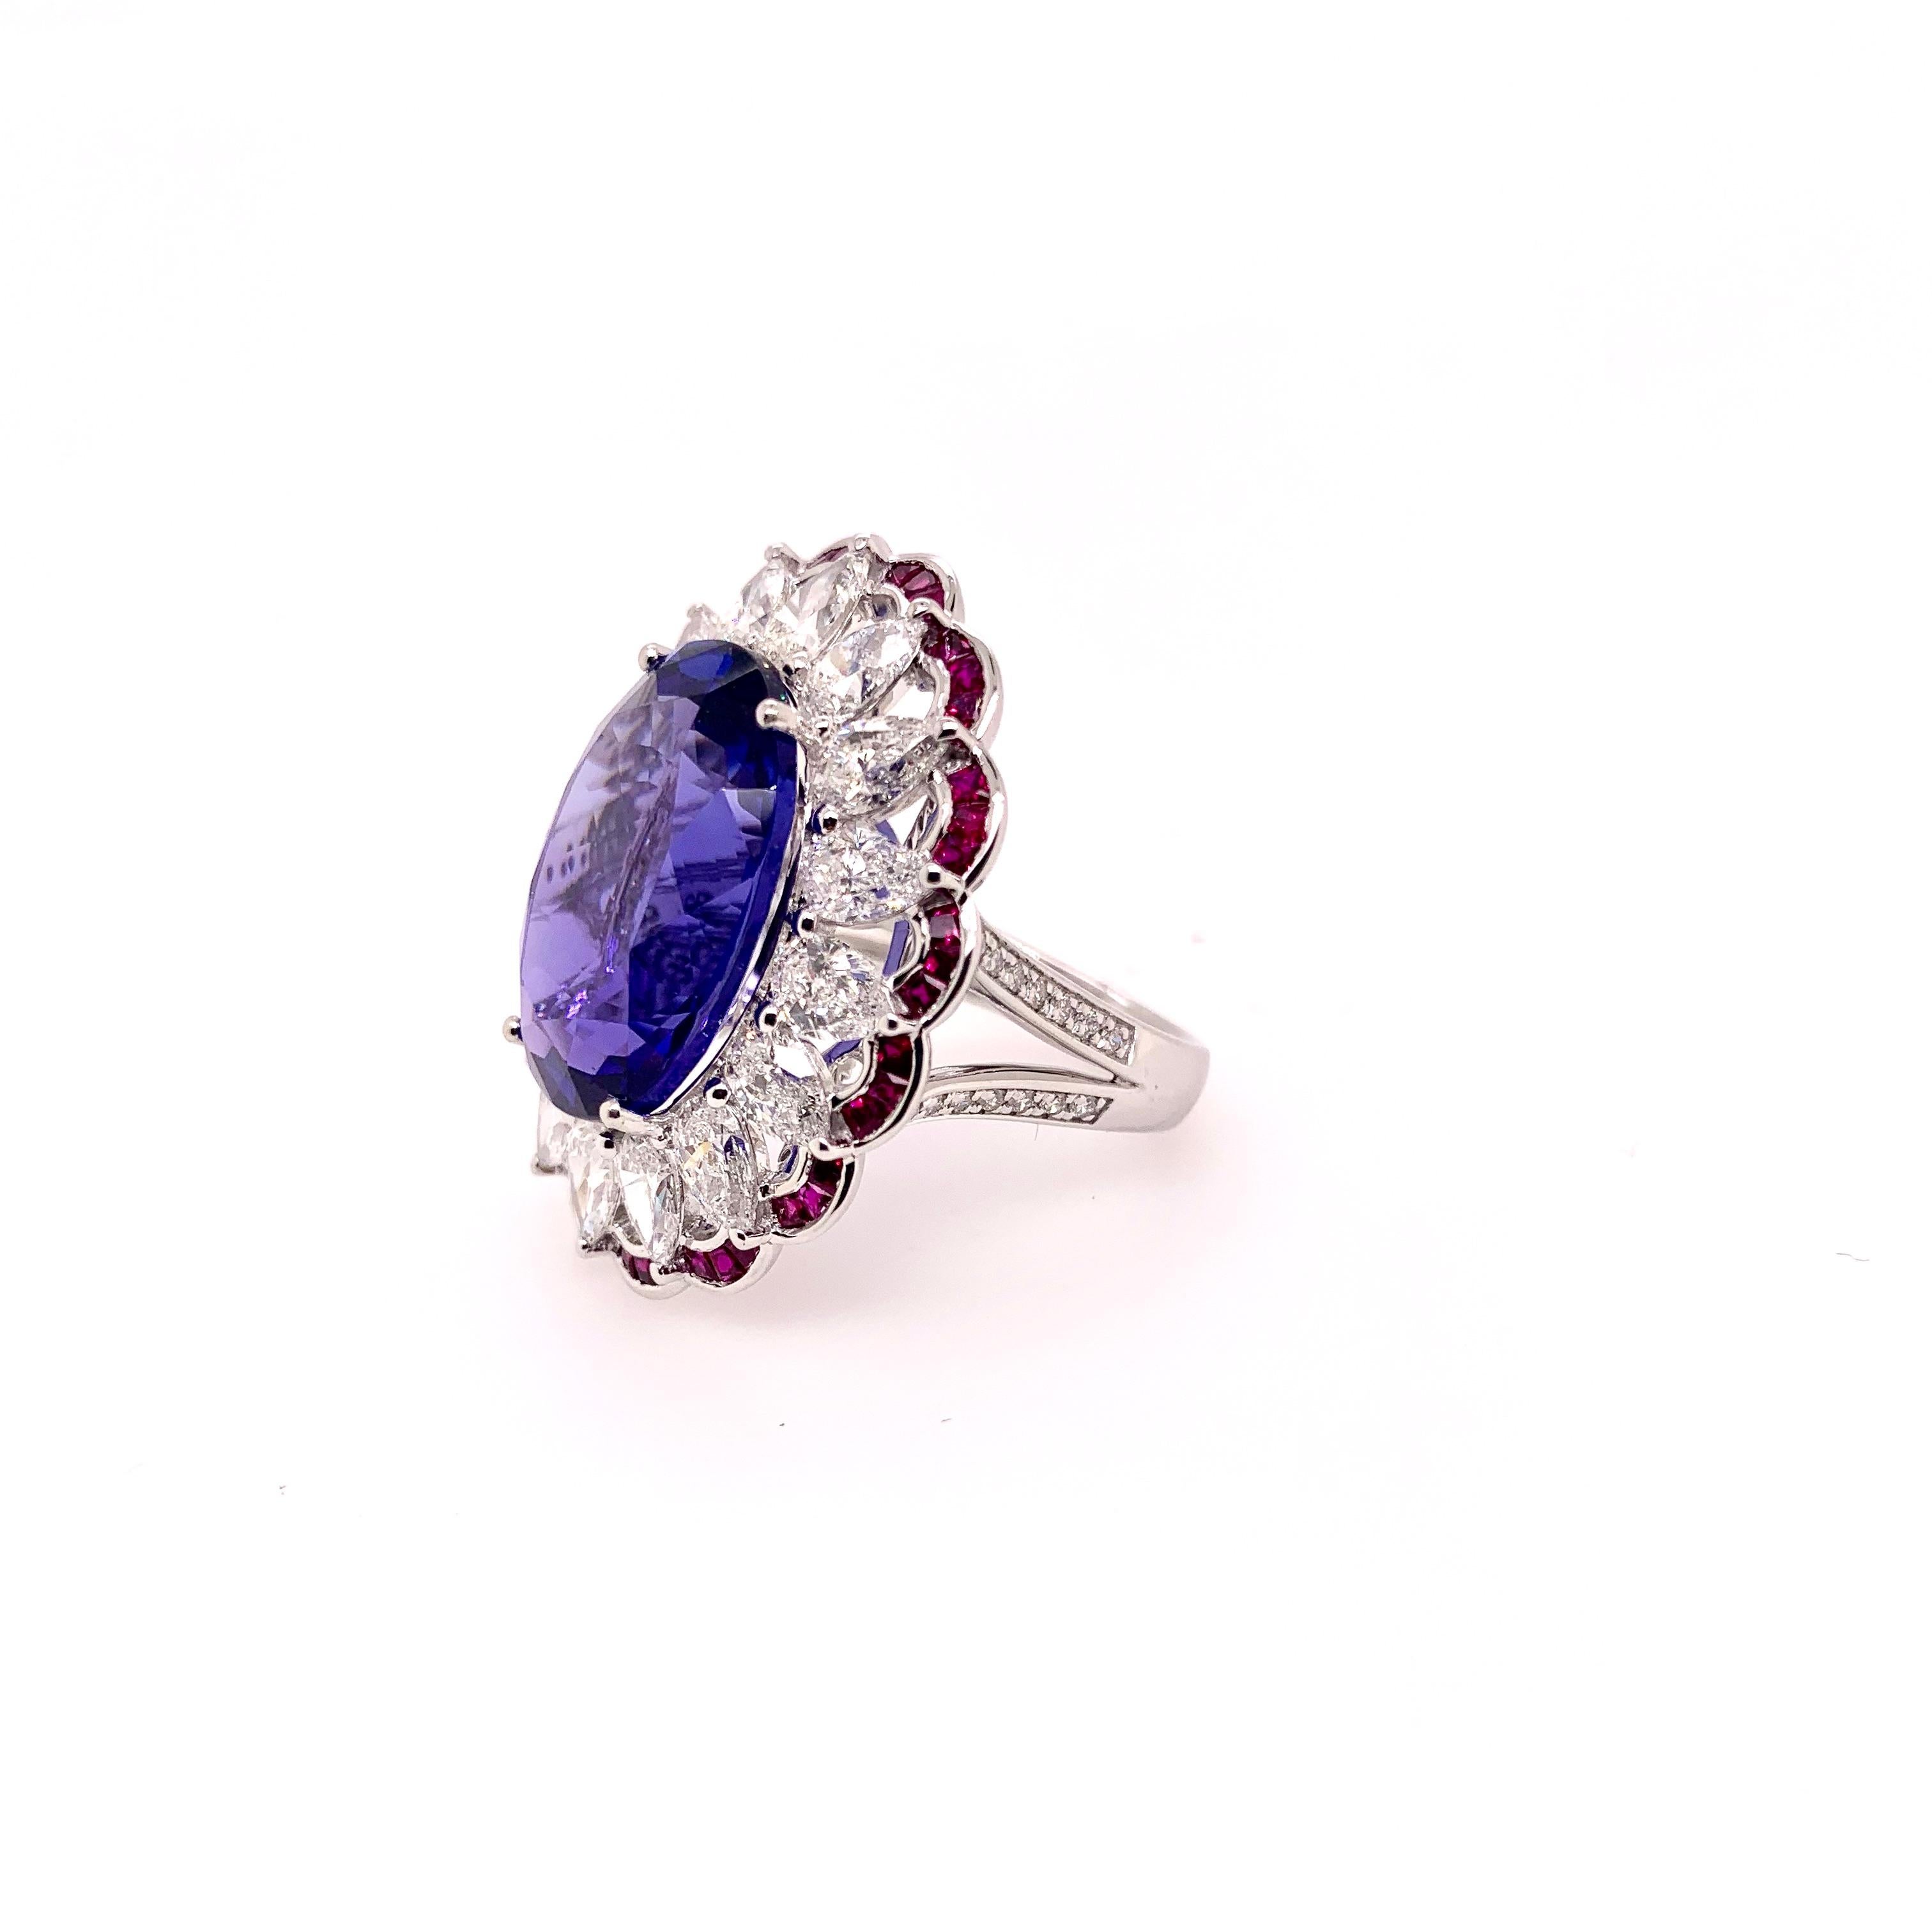 This elegant tanzanite ring was meticulously designed and crafted using the wonderful color combination of rubies and diamonds in a platinum setting.  The 15.5 carat oval tanzanite glistens with the red and purple hues.  It is supported by the 1